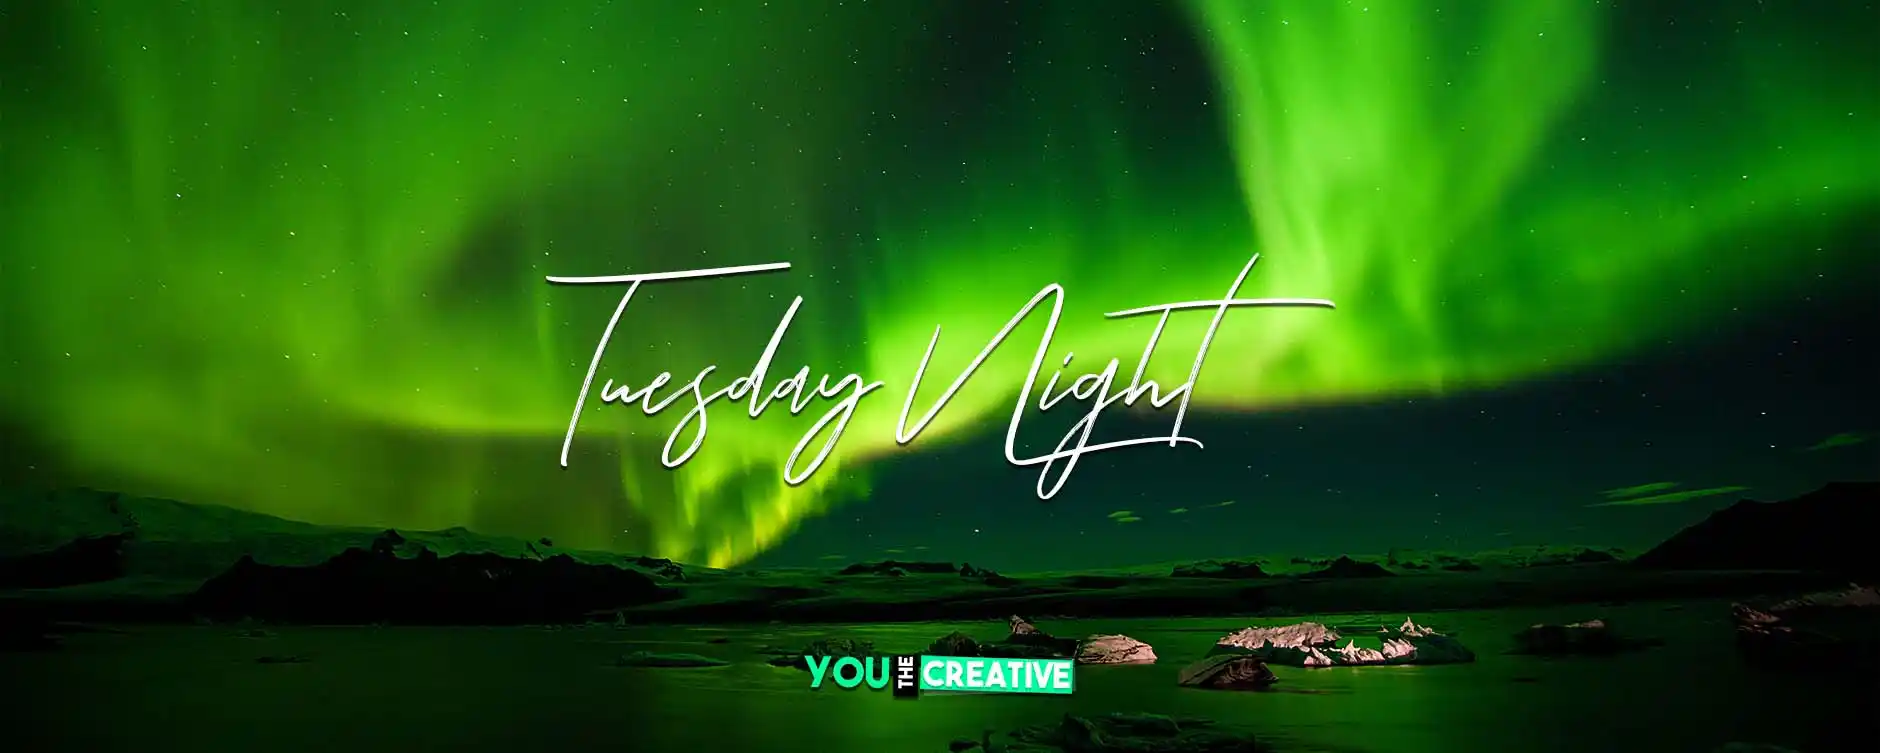 Tuesday night font for you